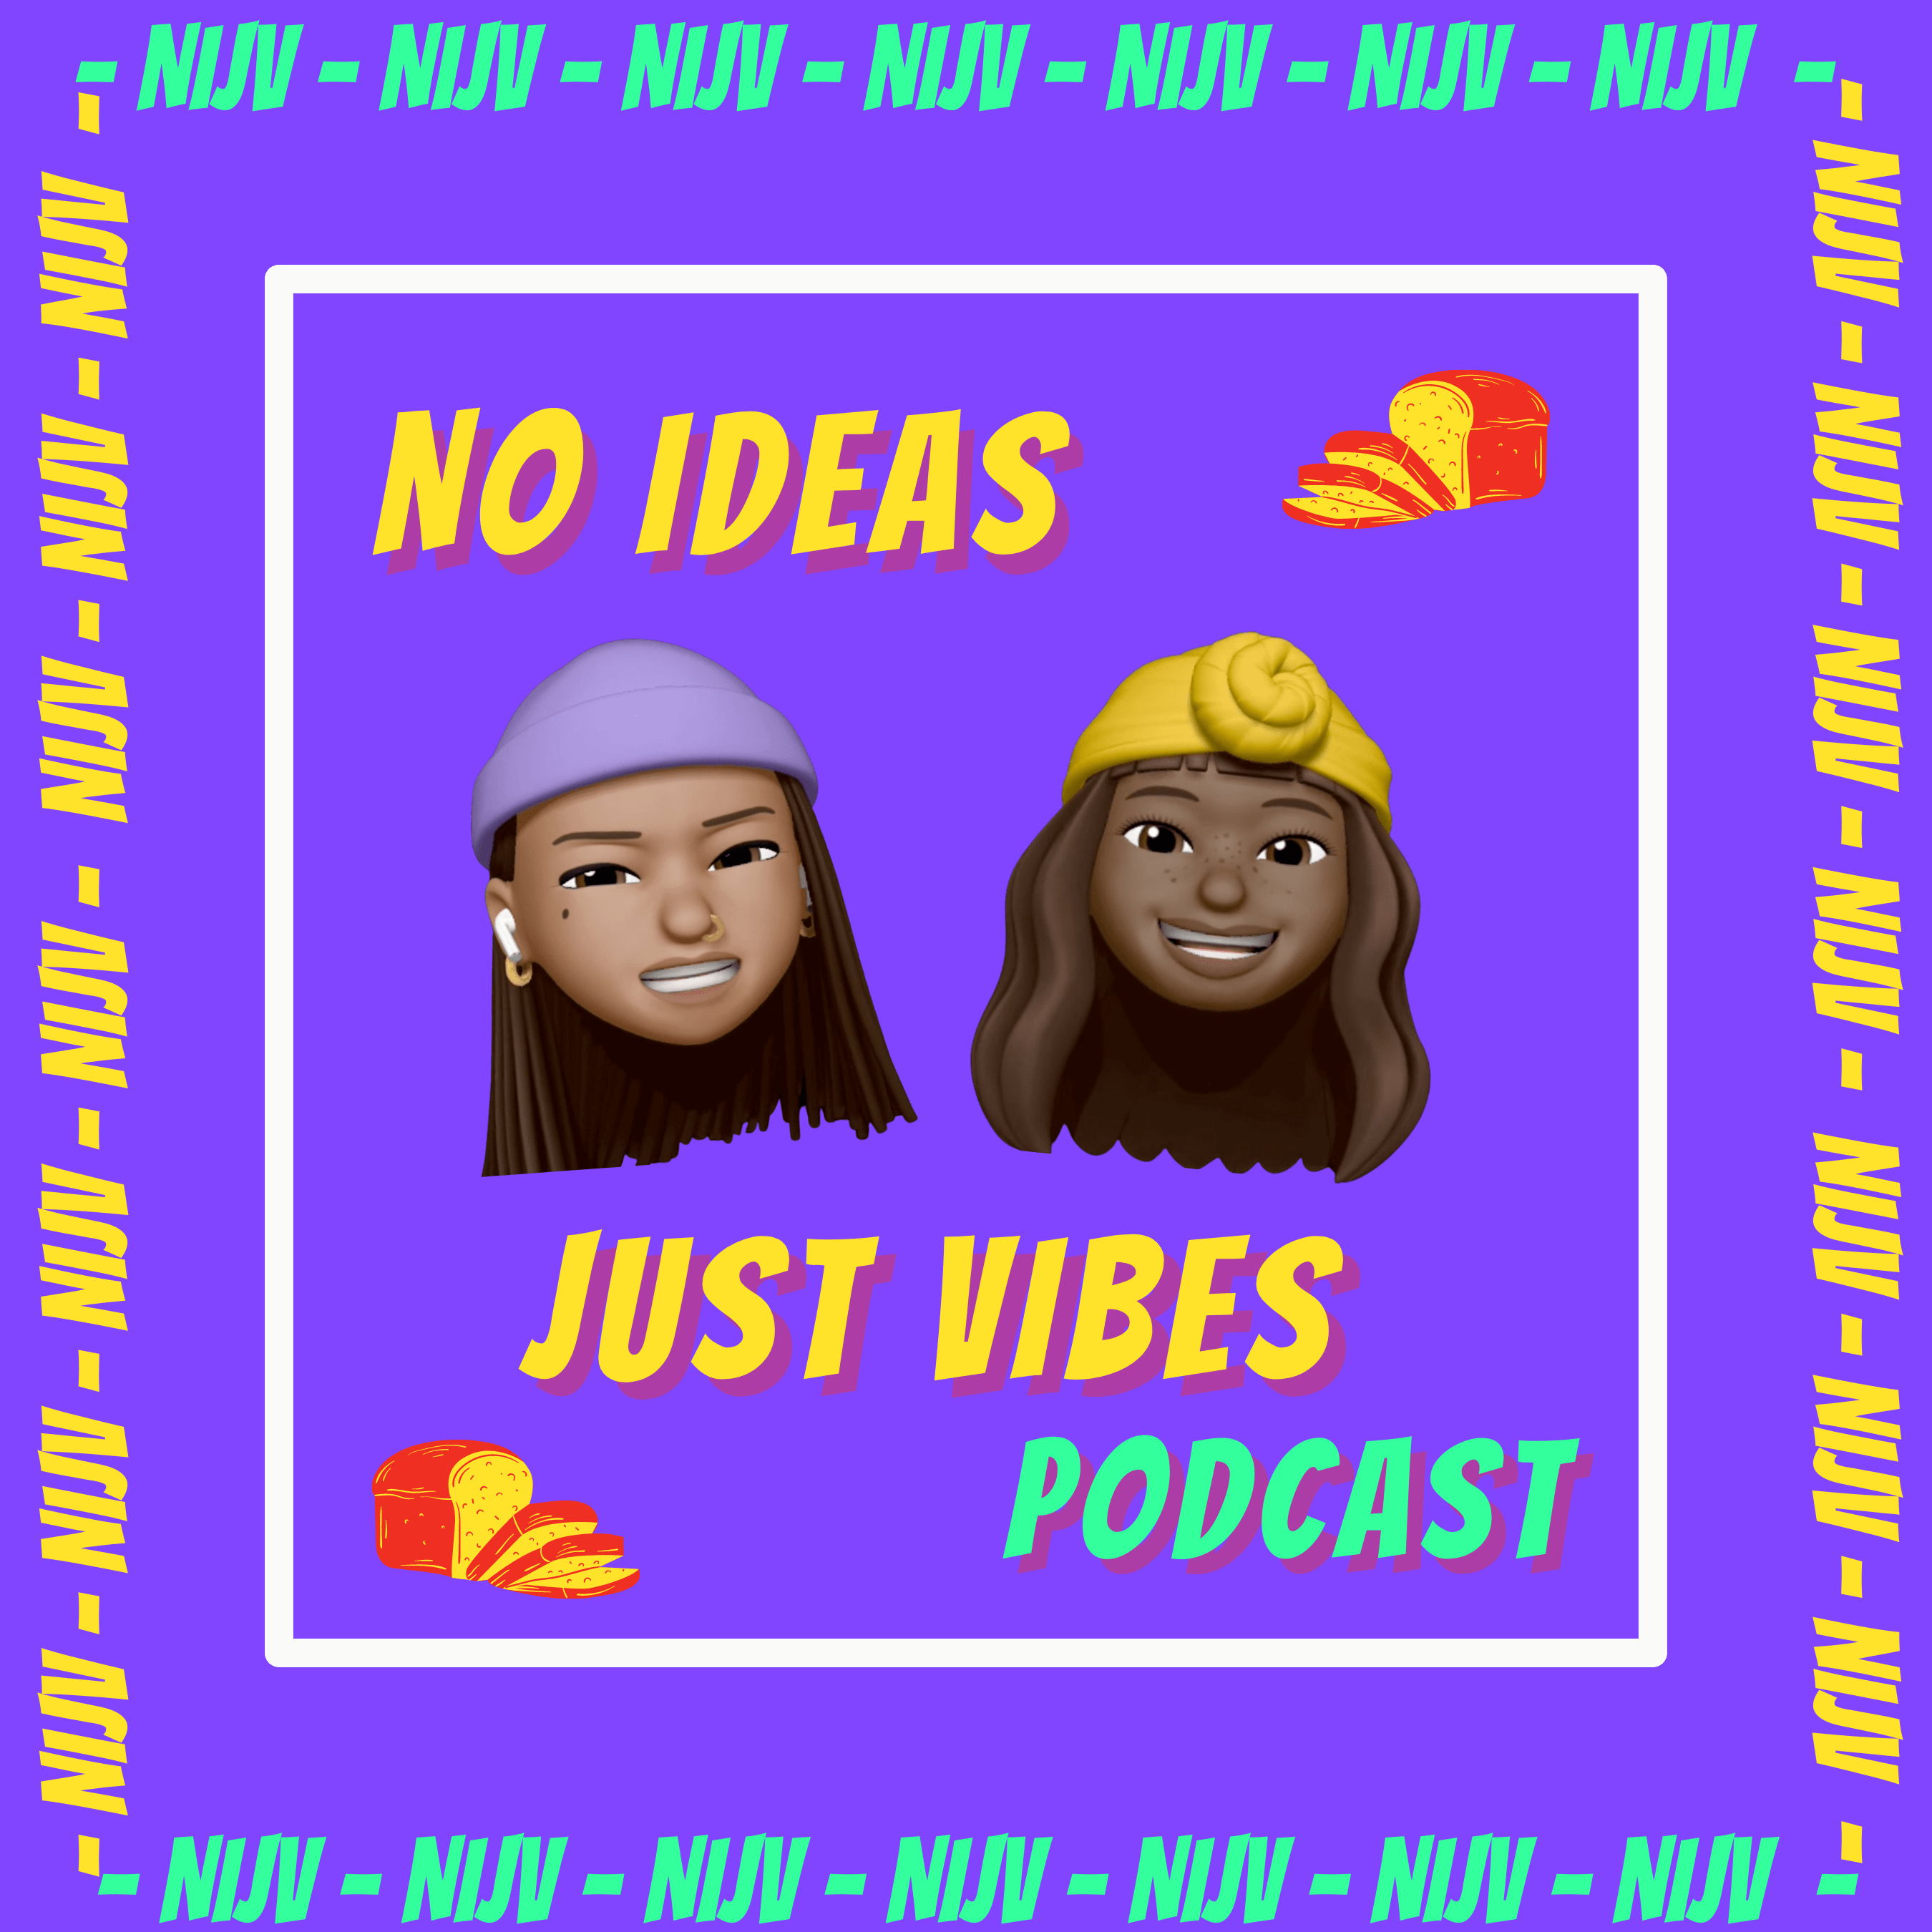 Artwork for podcast NO IDEAS JUST VIBES